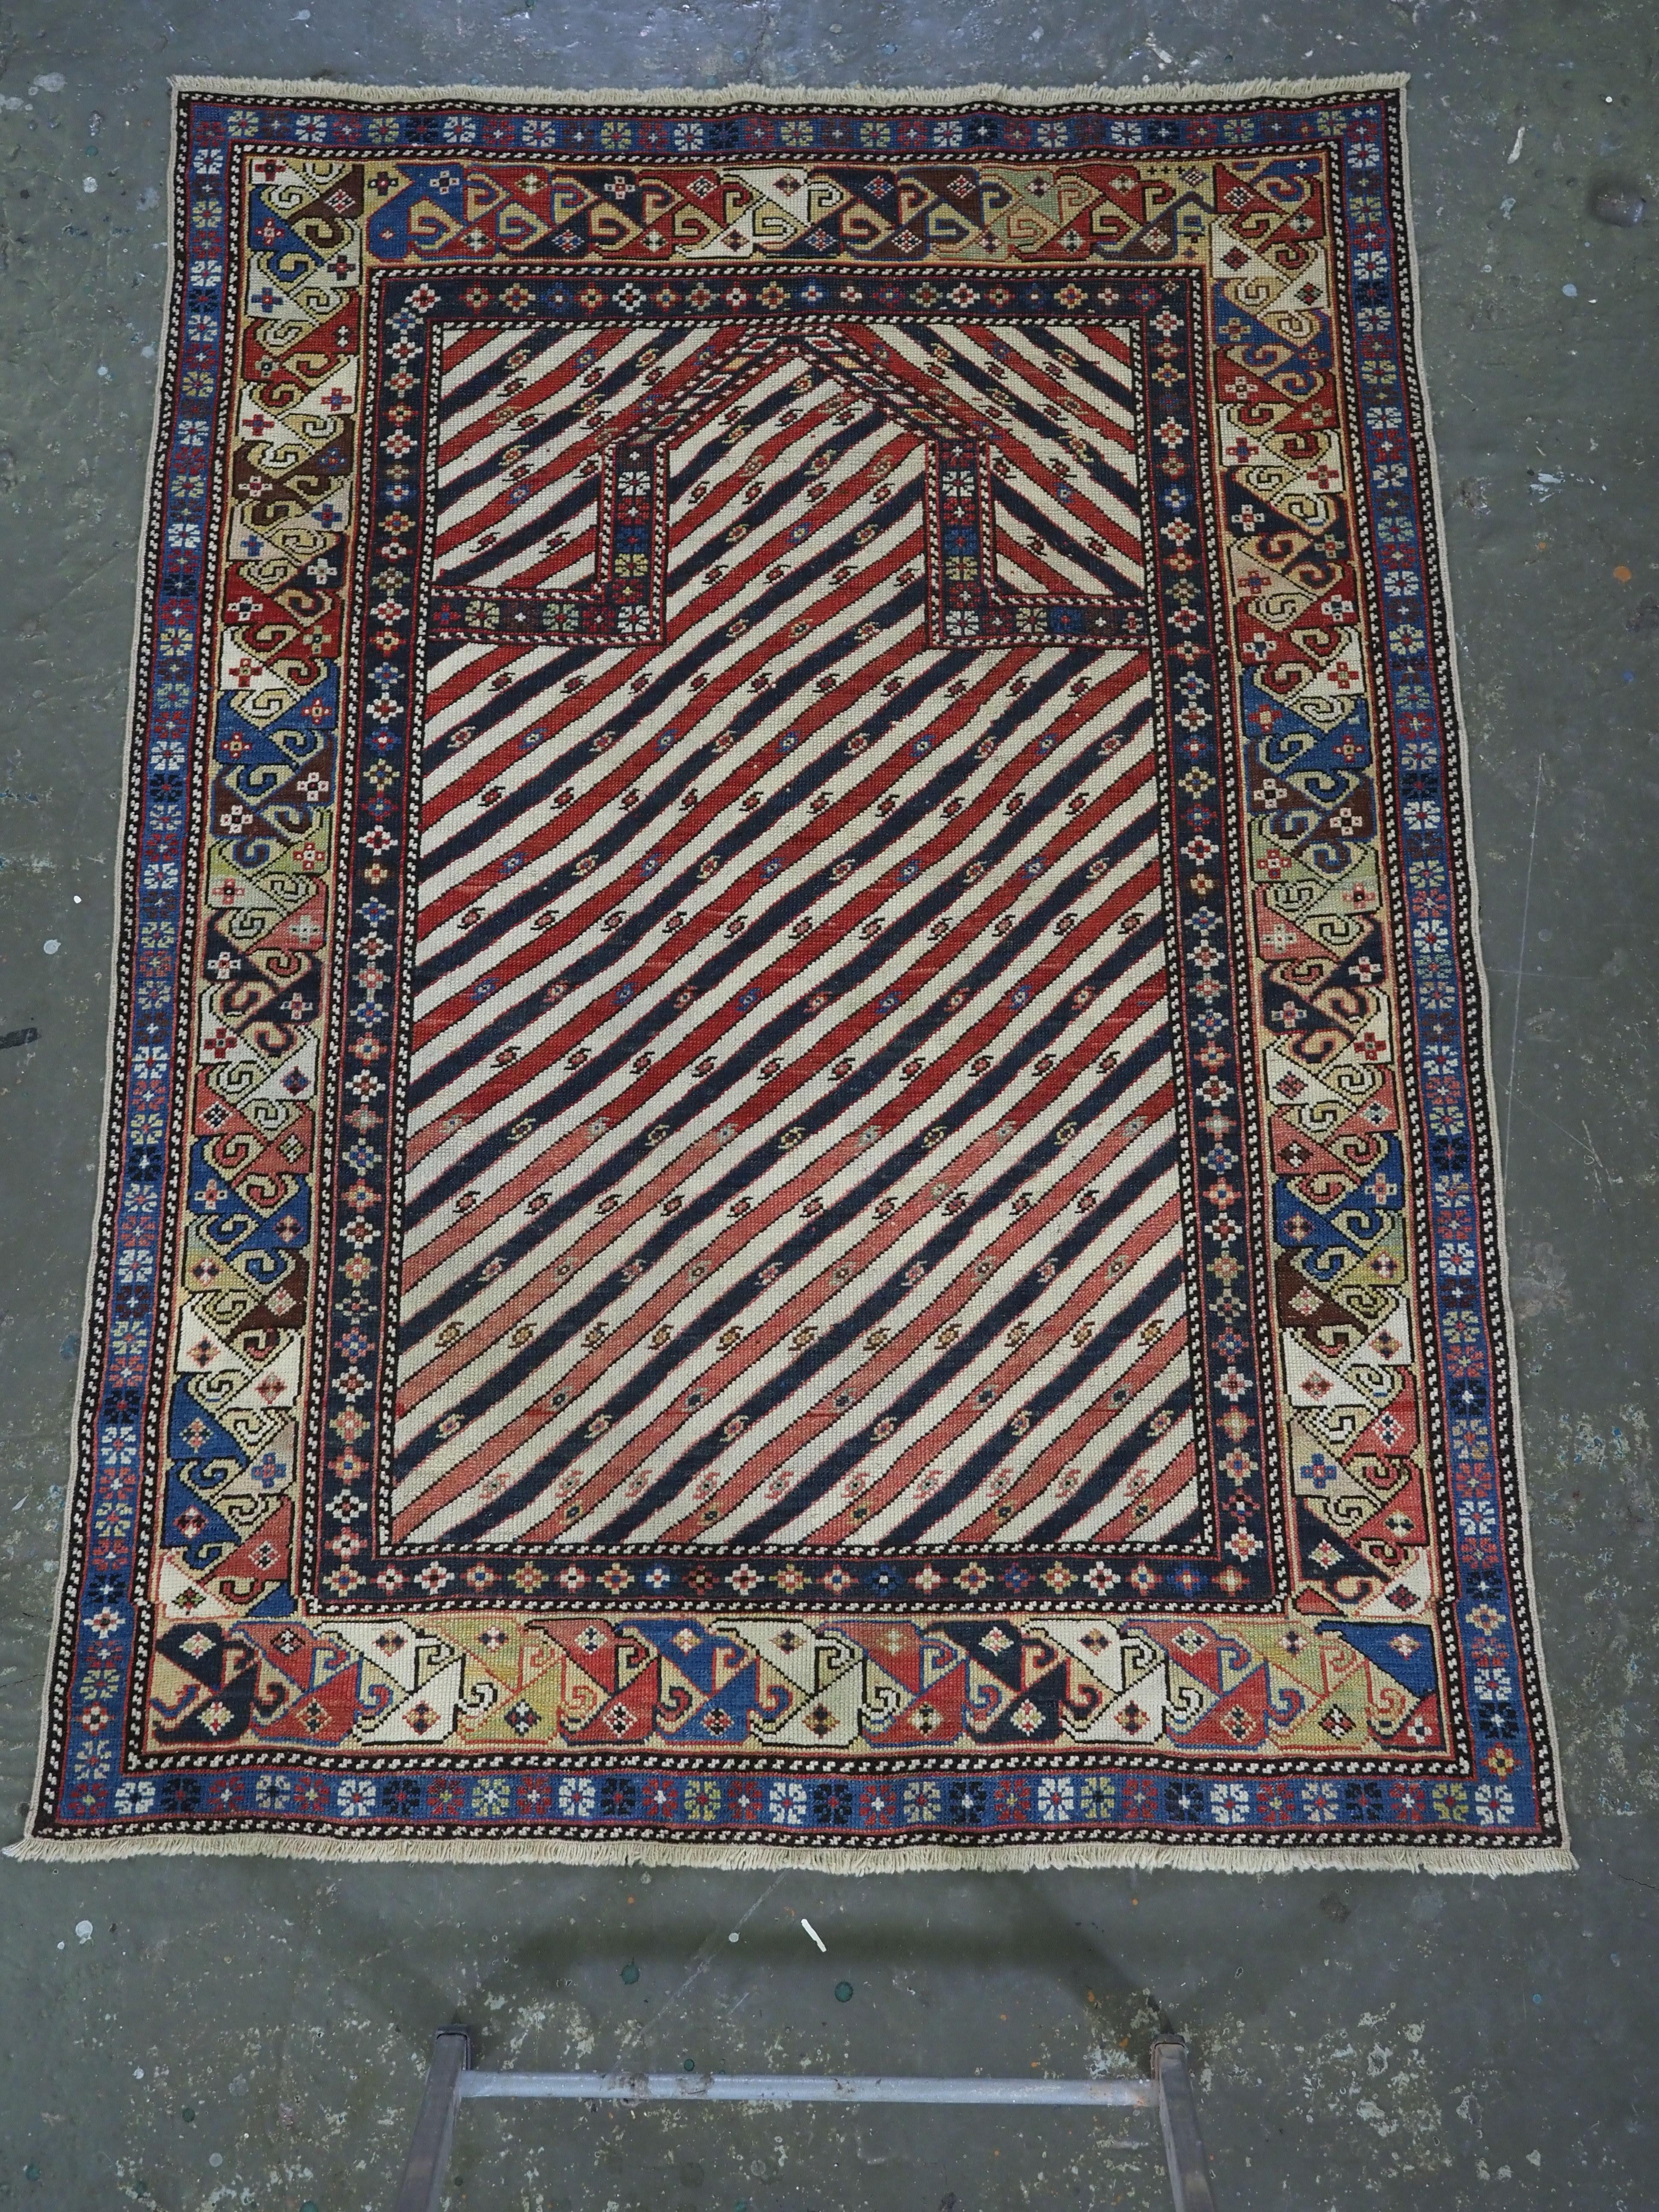 Size: 4ft 9in x 3ft 7in (145 x 109cm).

Antique Caucasian Shirvan or Dagestan prayer rug with scarce diagonal stipe design.

Circa 1870.

An outstanding example of this well documented group of prayer rugs, this rug is very will drawn with diagonal